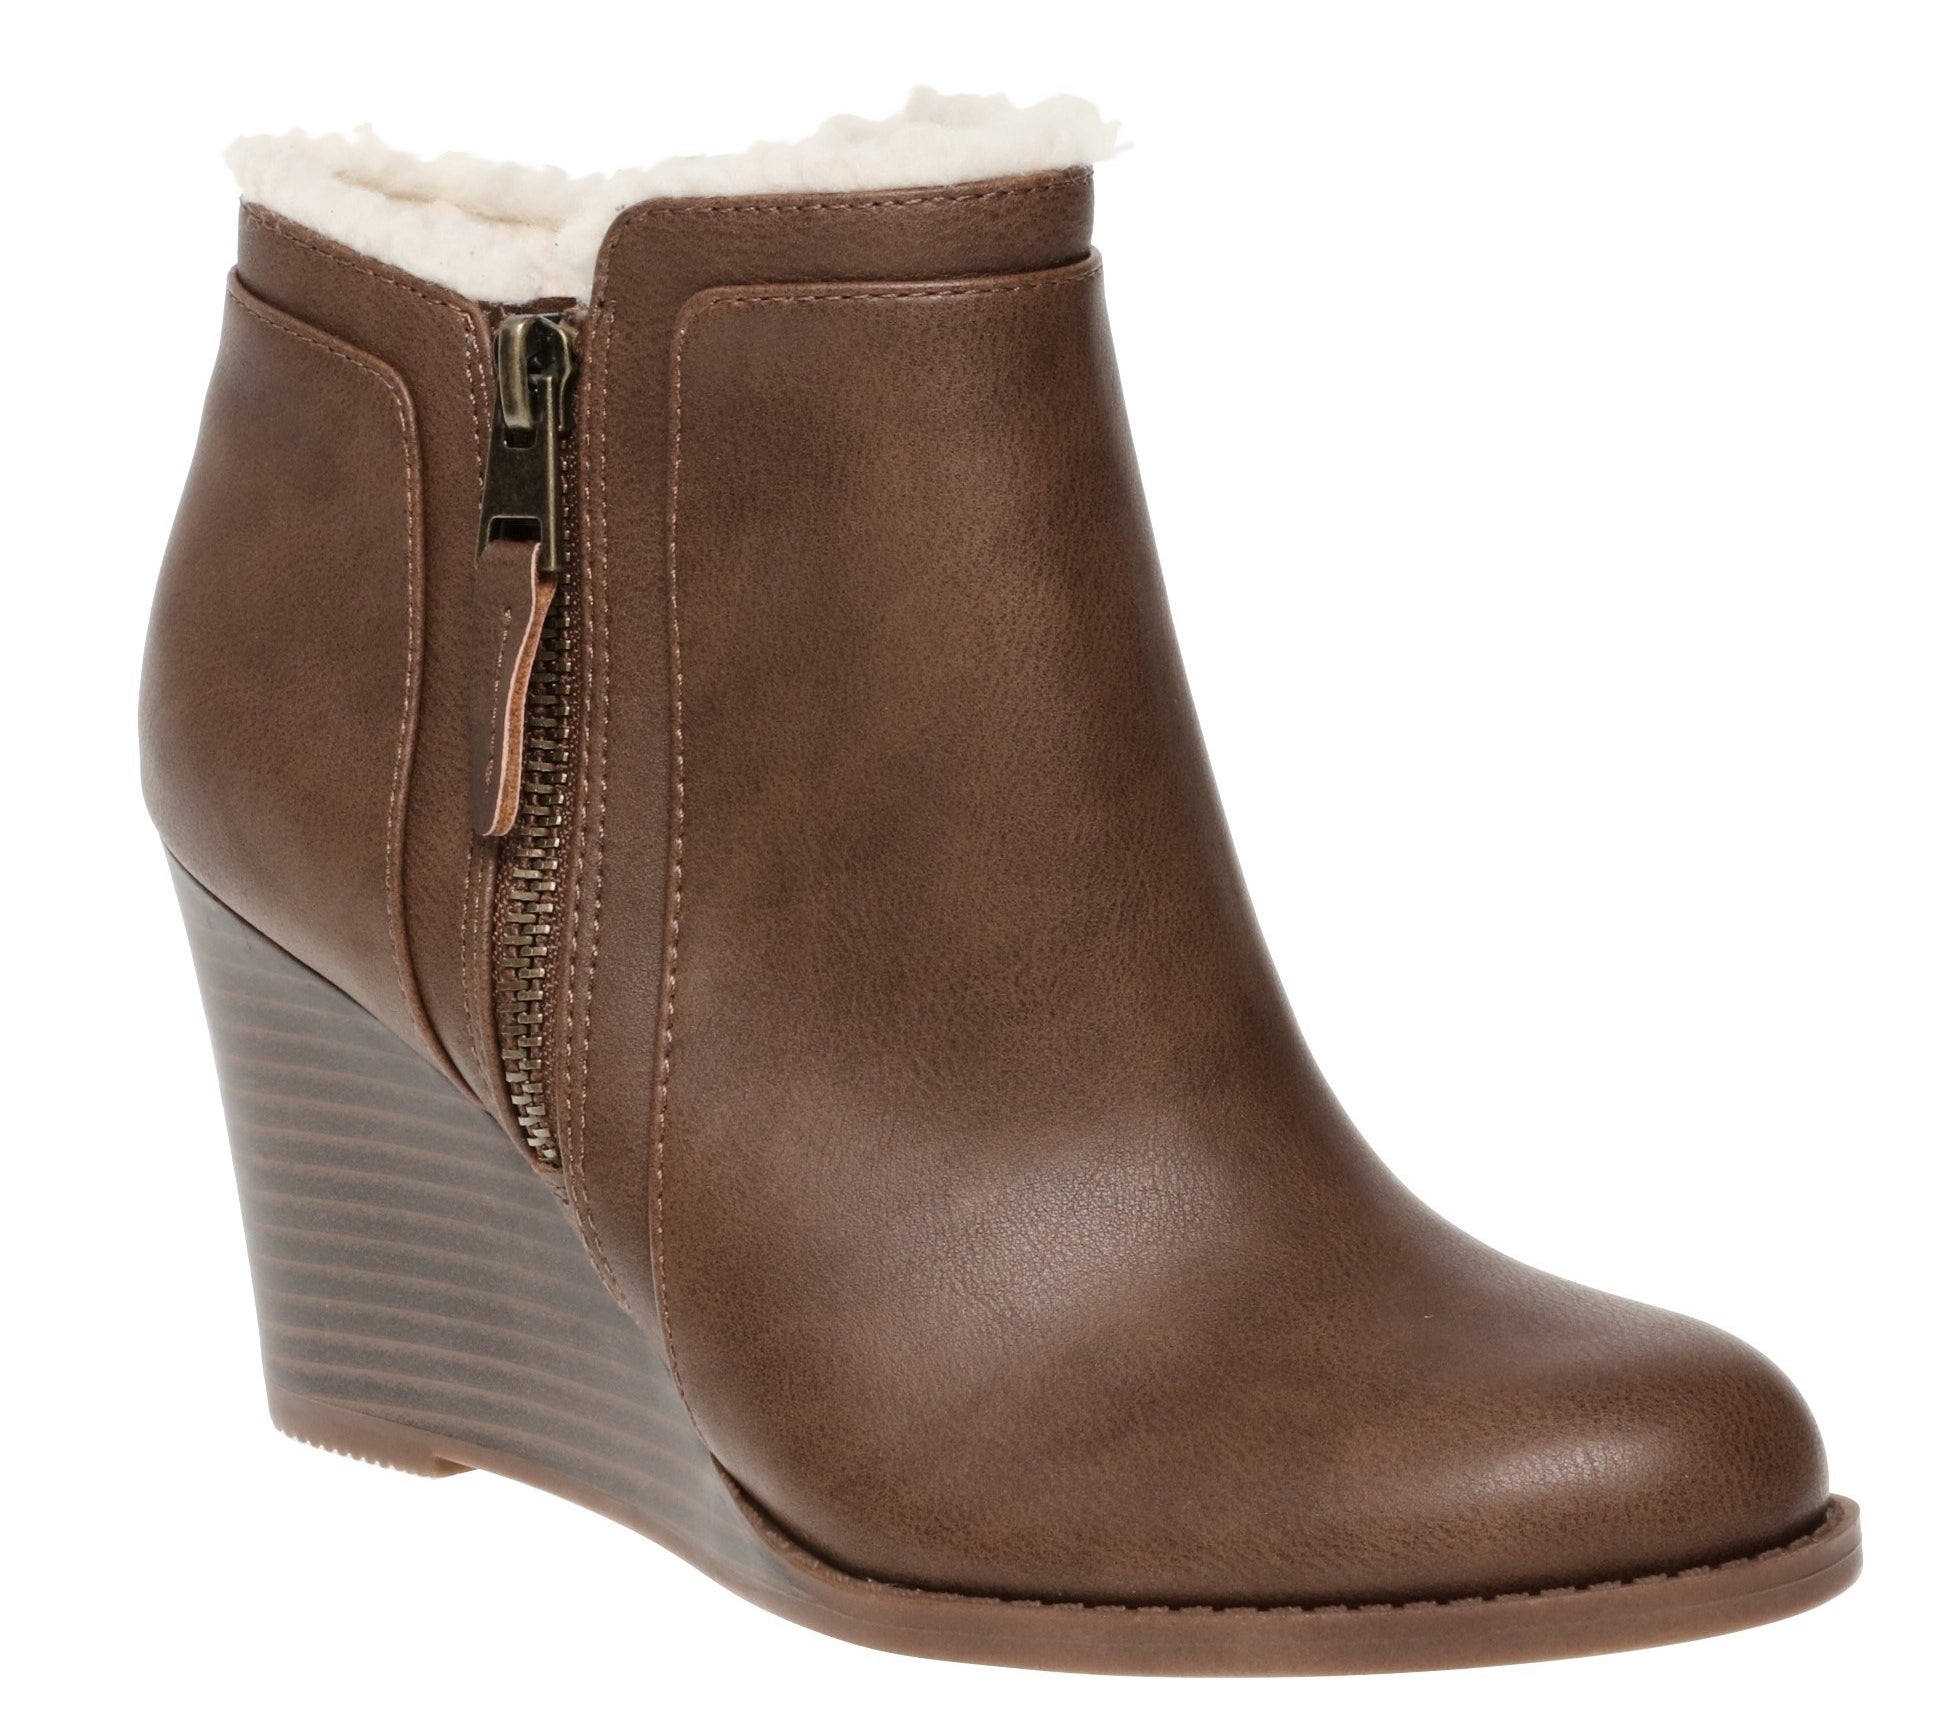 Of The Best Ankle Boots You Can Get At Walmart